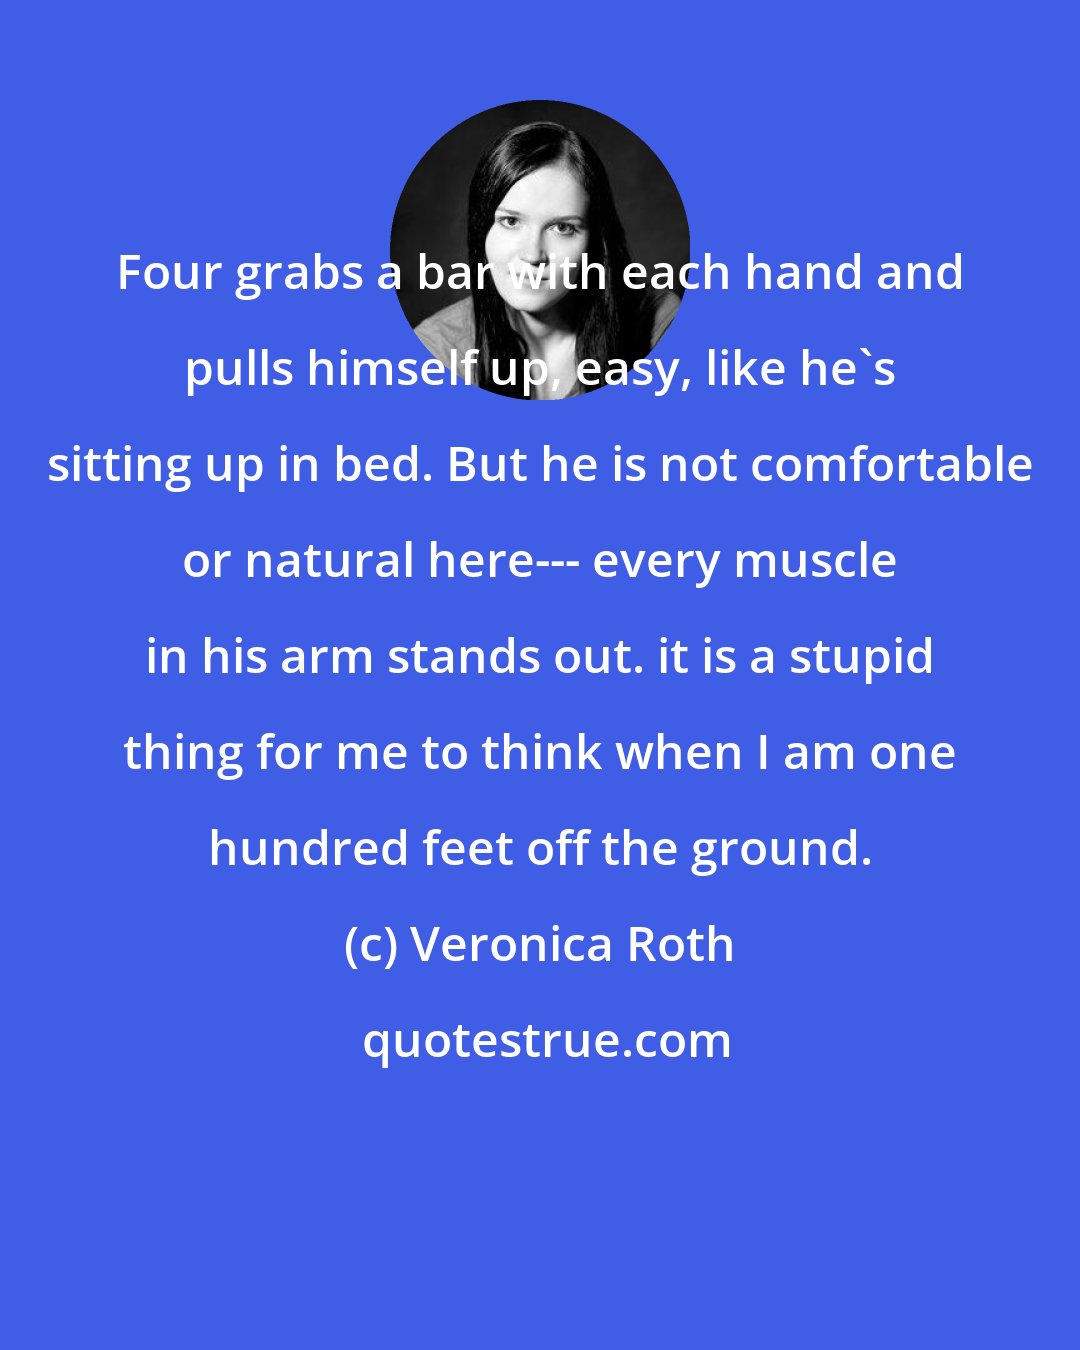 Veronica Roth: Four grabs a bar with each hand and pulls himself up, easy, like he's sitting up in bed. But he is not comfortable or natural here--- every muscle in his arm stands out. it is a stupid thing for me to think when I am one hundred feet off the ground.